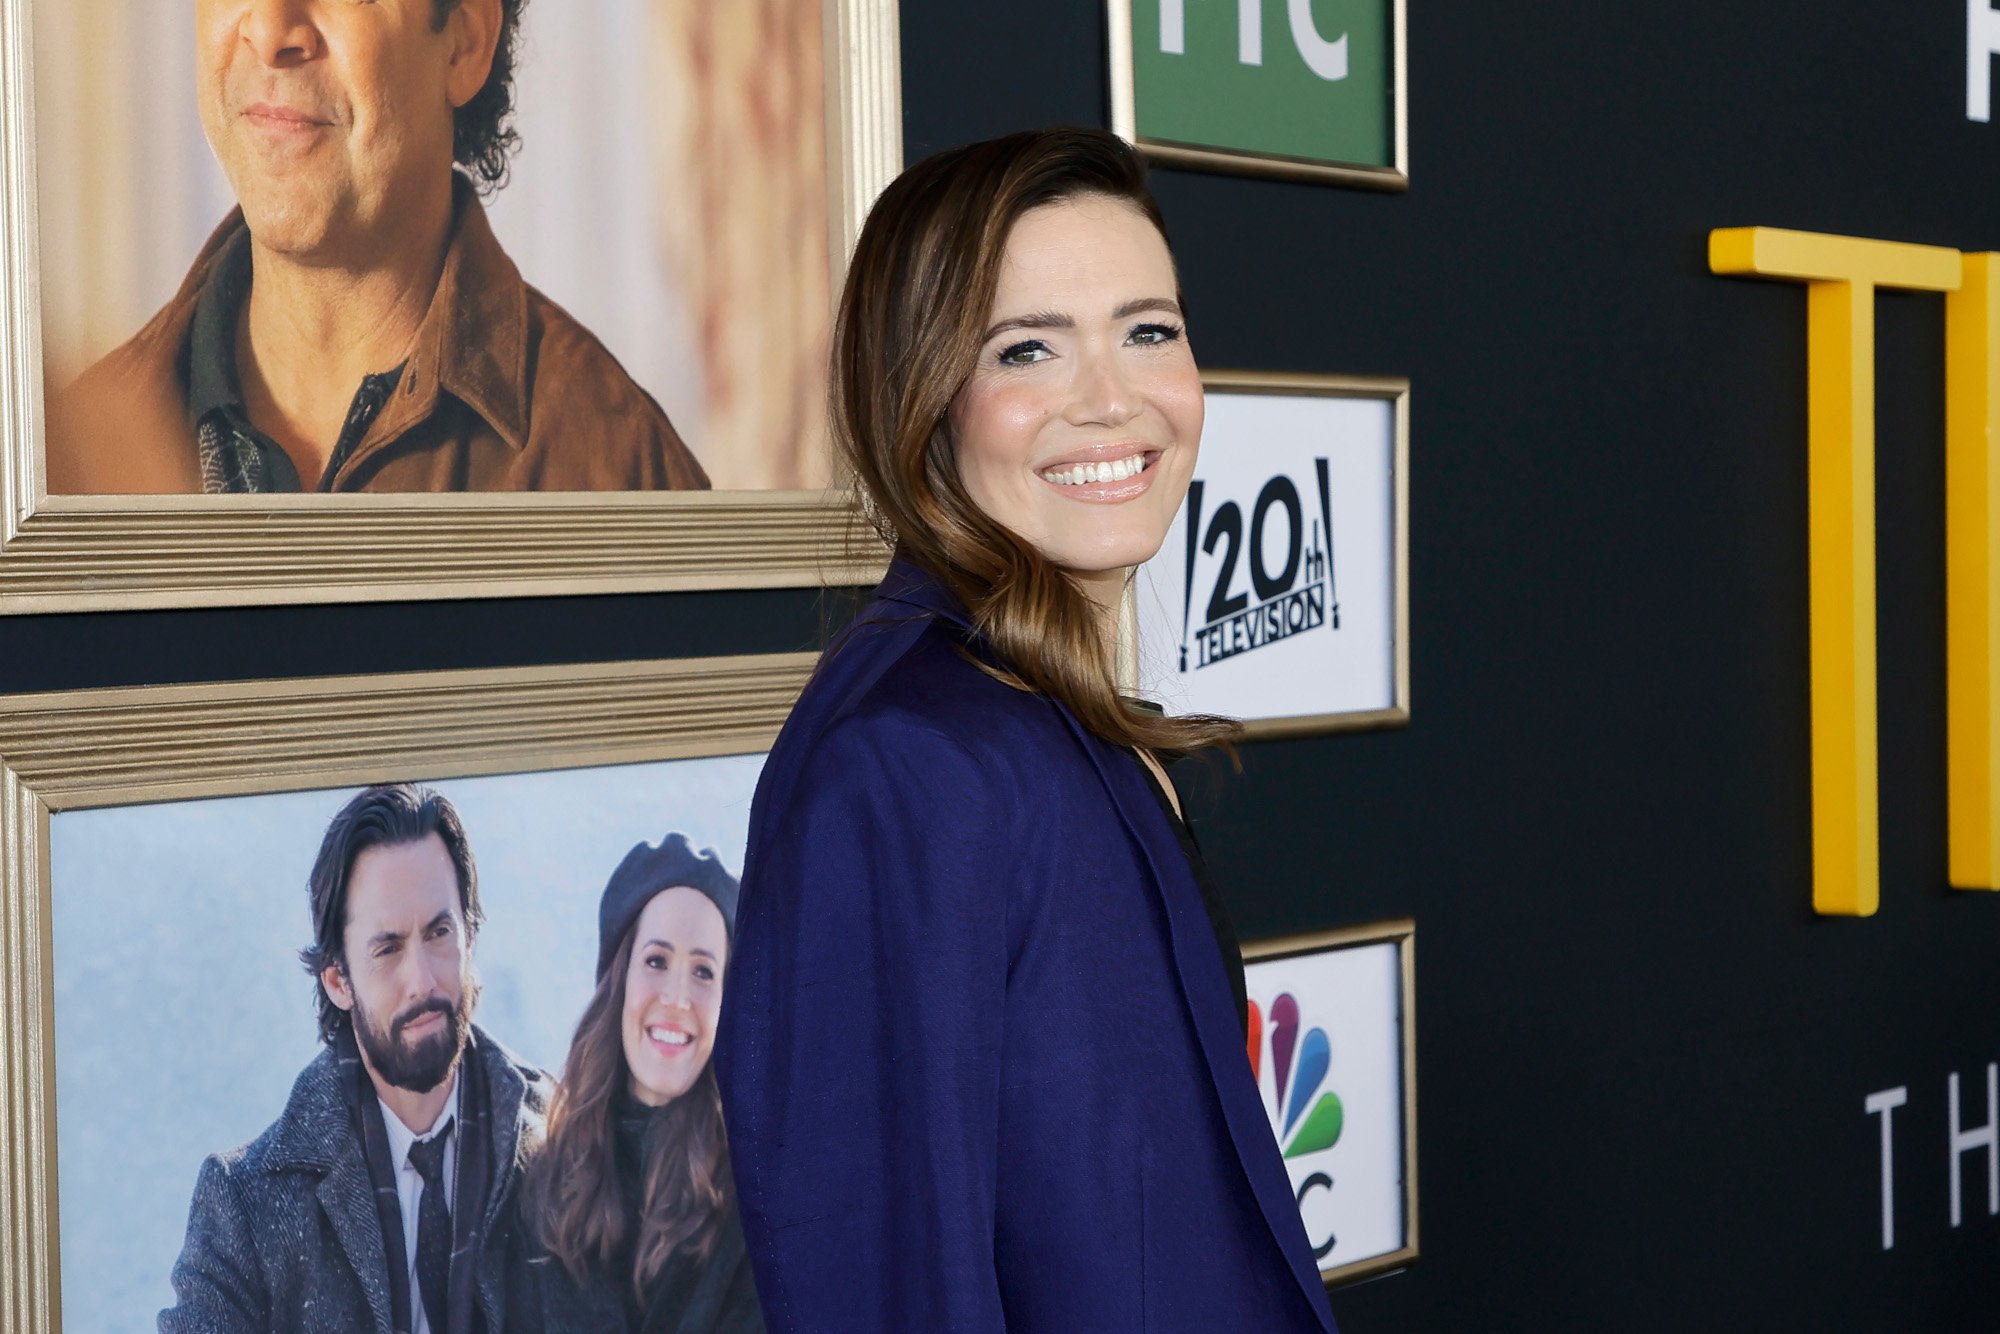 'This Is Us' star Mandy Moore, who says the penultimate episode felt like the series finale for her. She's wearing a blue blazer and standing in front of a wall with 'This Is Us' memorabilia on it.